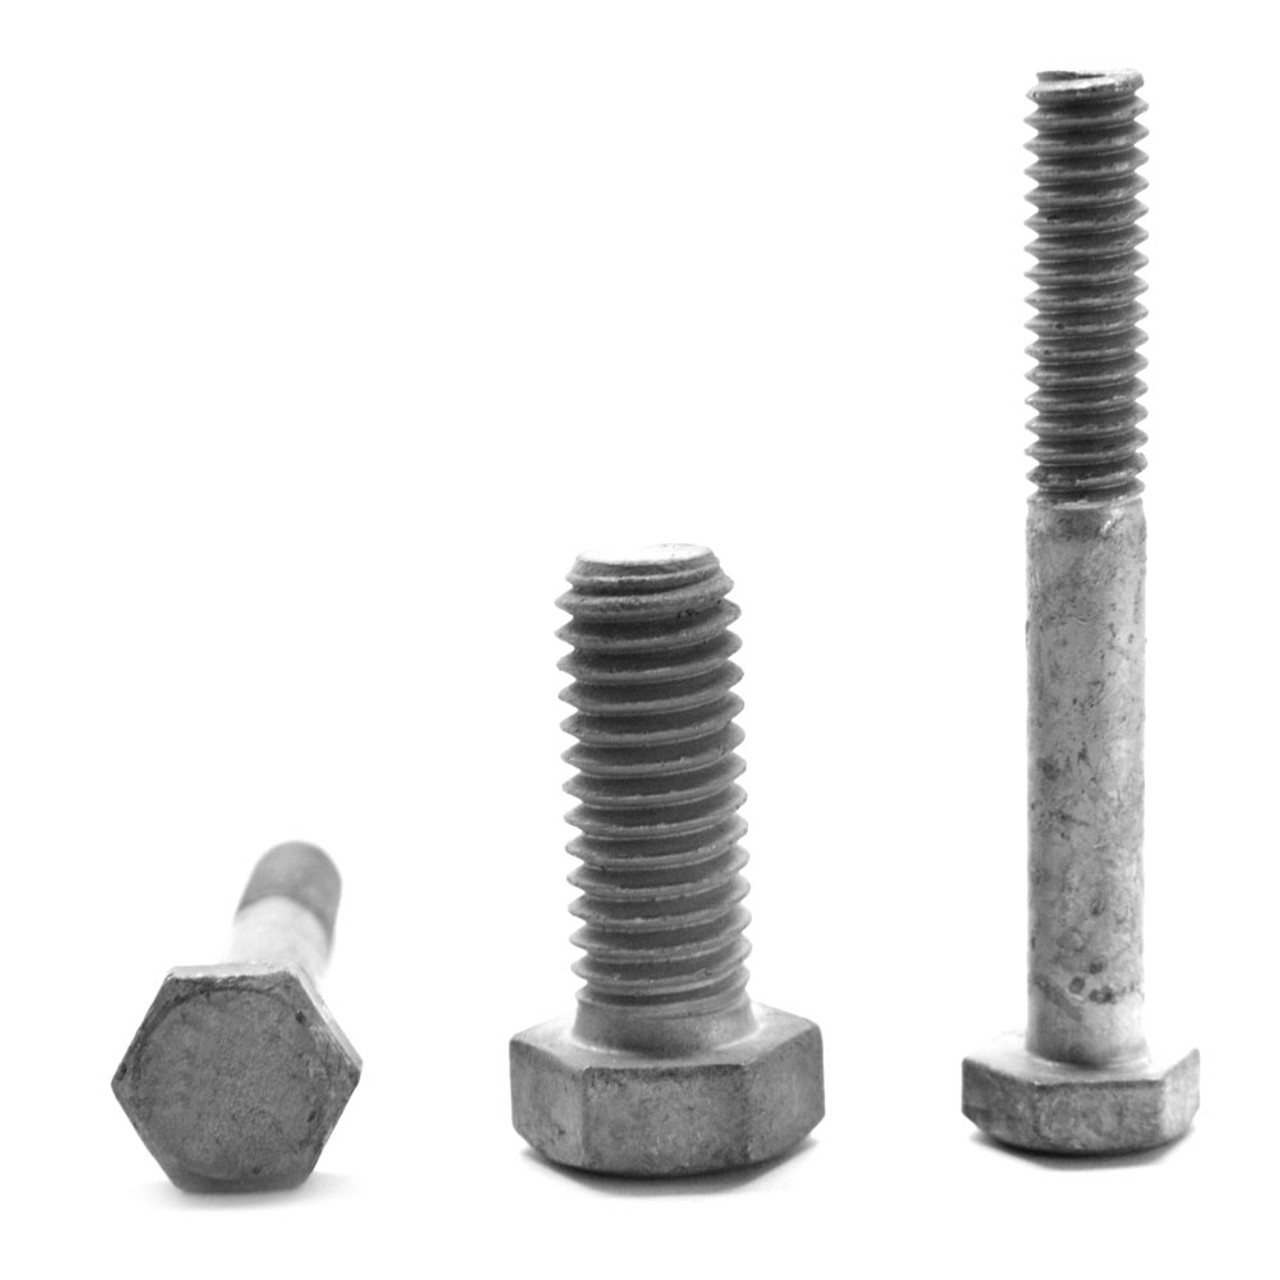 1/2"-13 x 16"6"THD UNDER-SIZED Coarse Thread A307 Grade A Hex Bolt Low Carbon Steel Hot Dip Galvanized